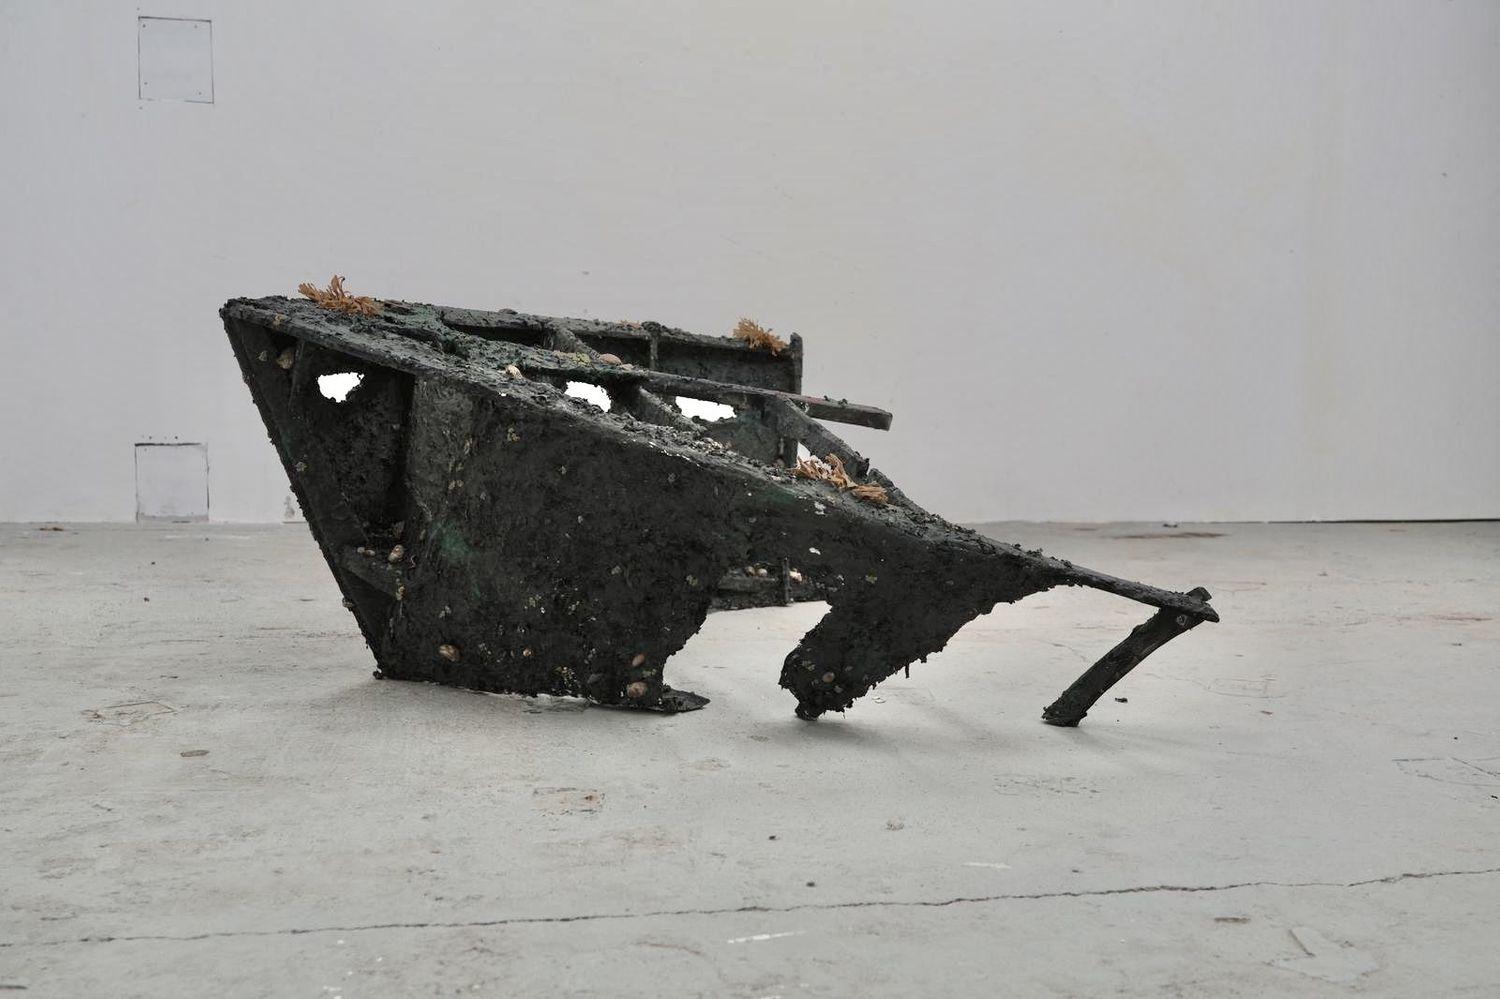 Stove By a Whale  | Seongeun Lee, Steven He | Staffordshire St